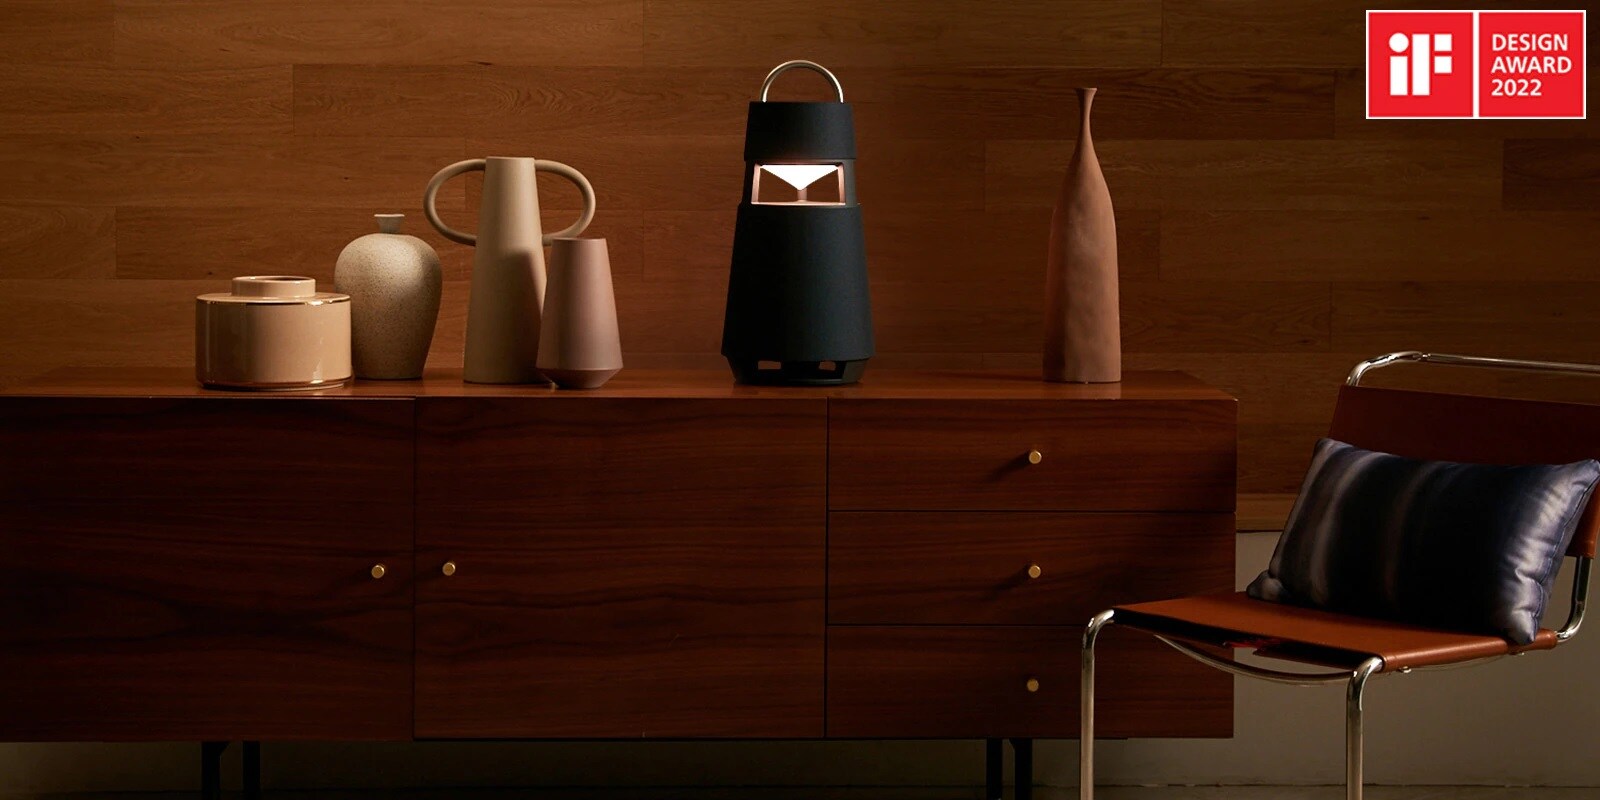 Image of the XBOOM 360 with sculptures on a shelf in a wood-toned interior background.